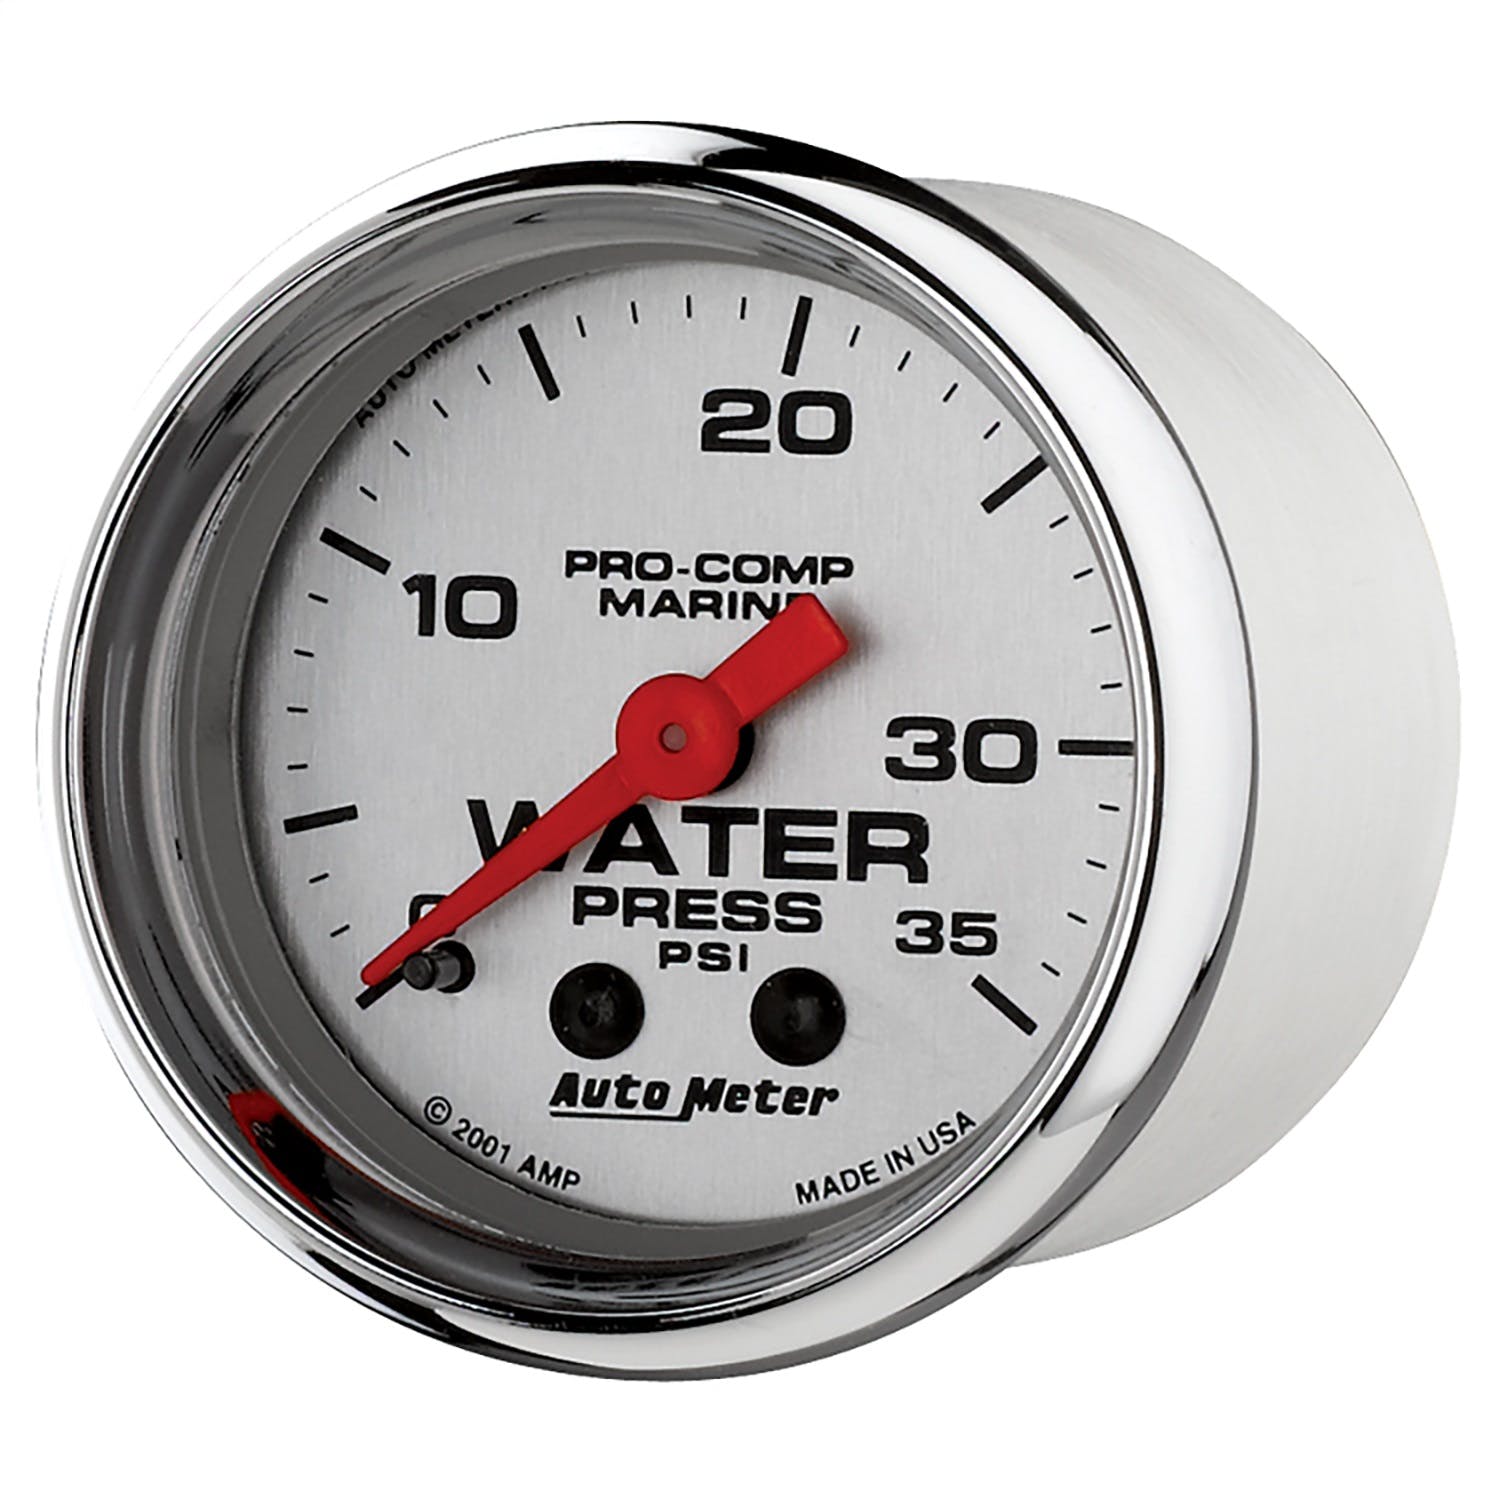 AutoMeter Products 200772-35 Marine Mechanical Water Pressure Gauge